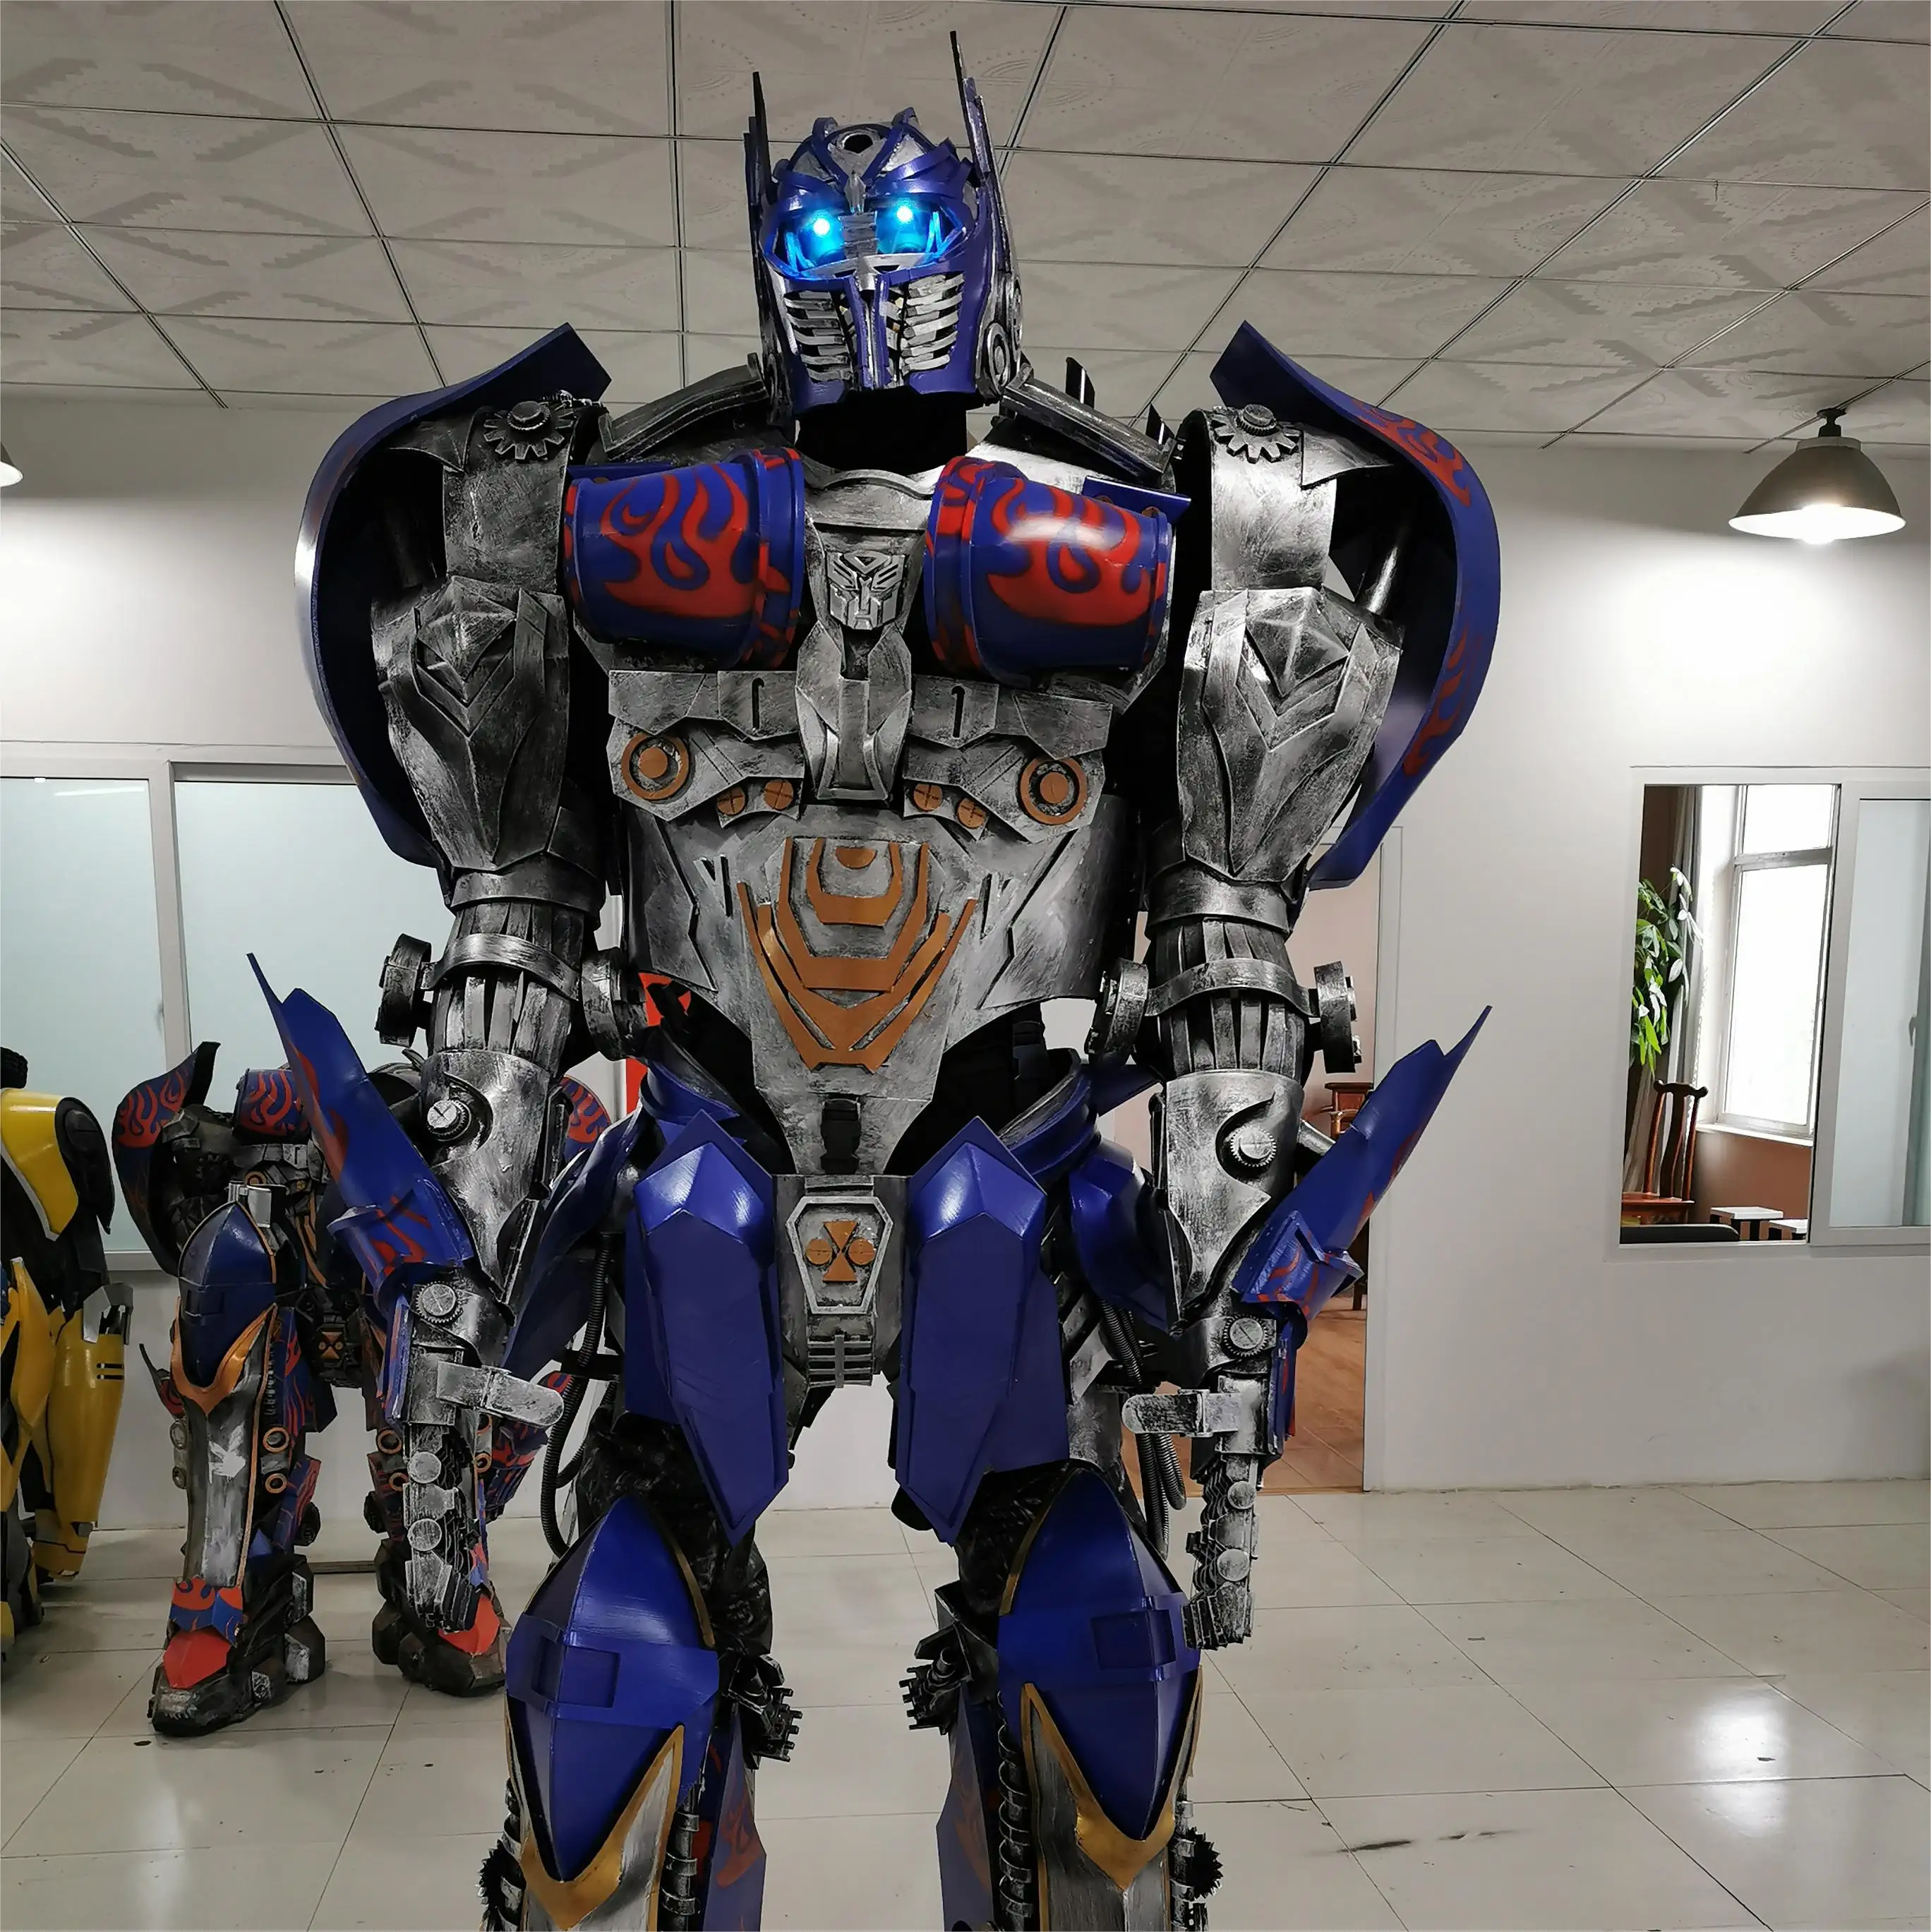 2021 2.7m tall high quality transformer costume adult, wearable robot costume, robot costumes suits for sale